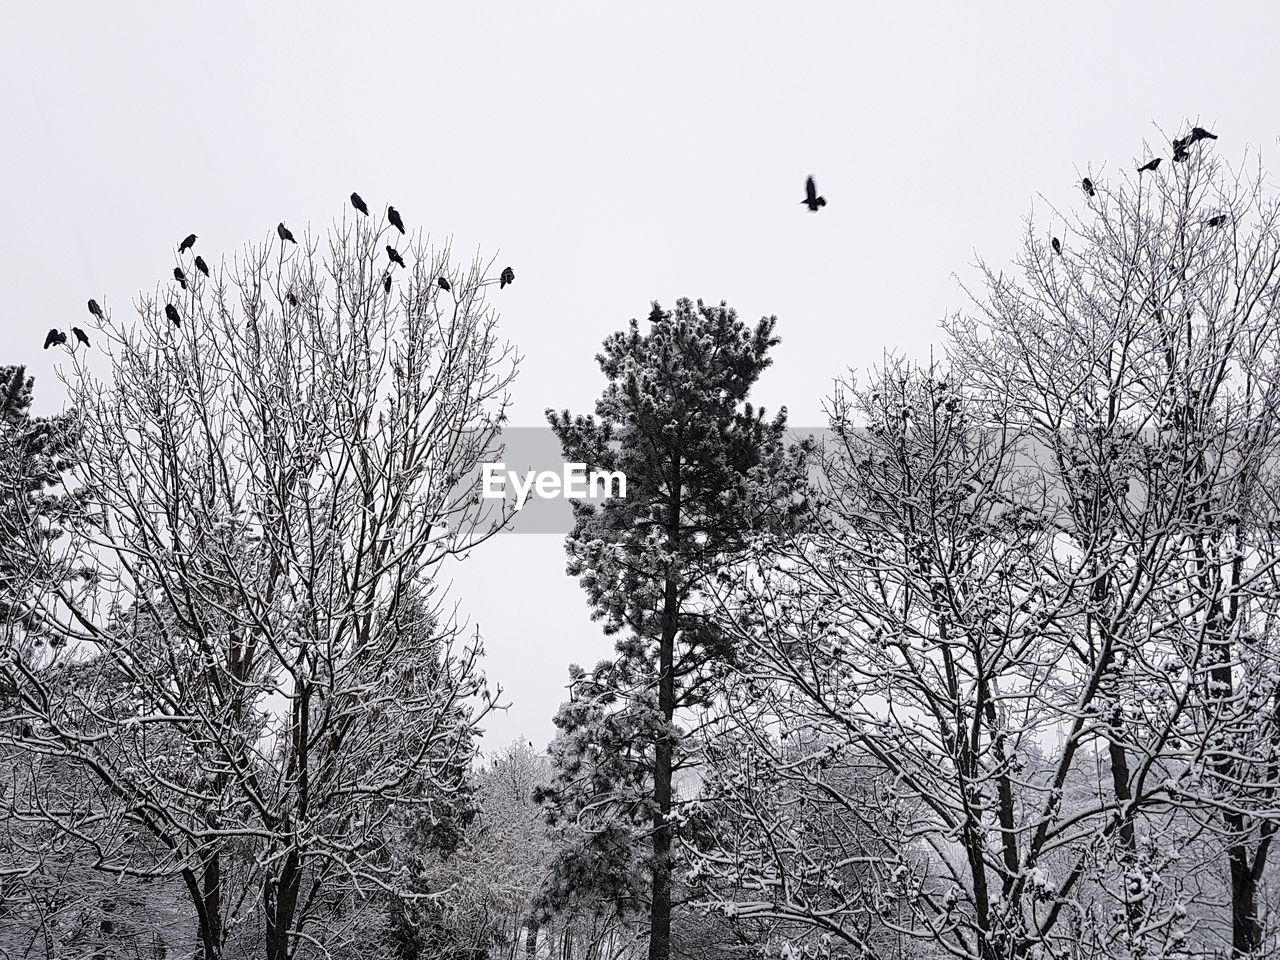 LOW ANGLE VIEW OF BIRDS FLYING AGAINST BARE TREES